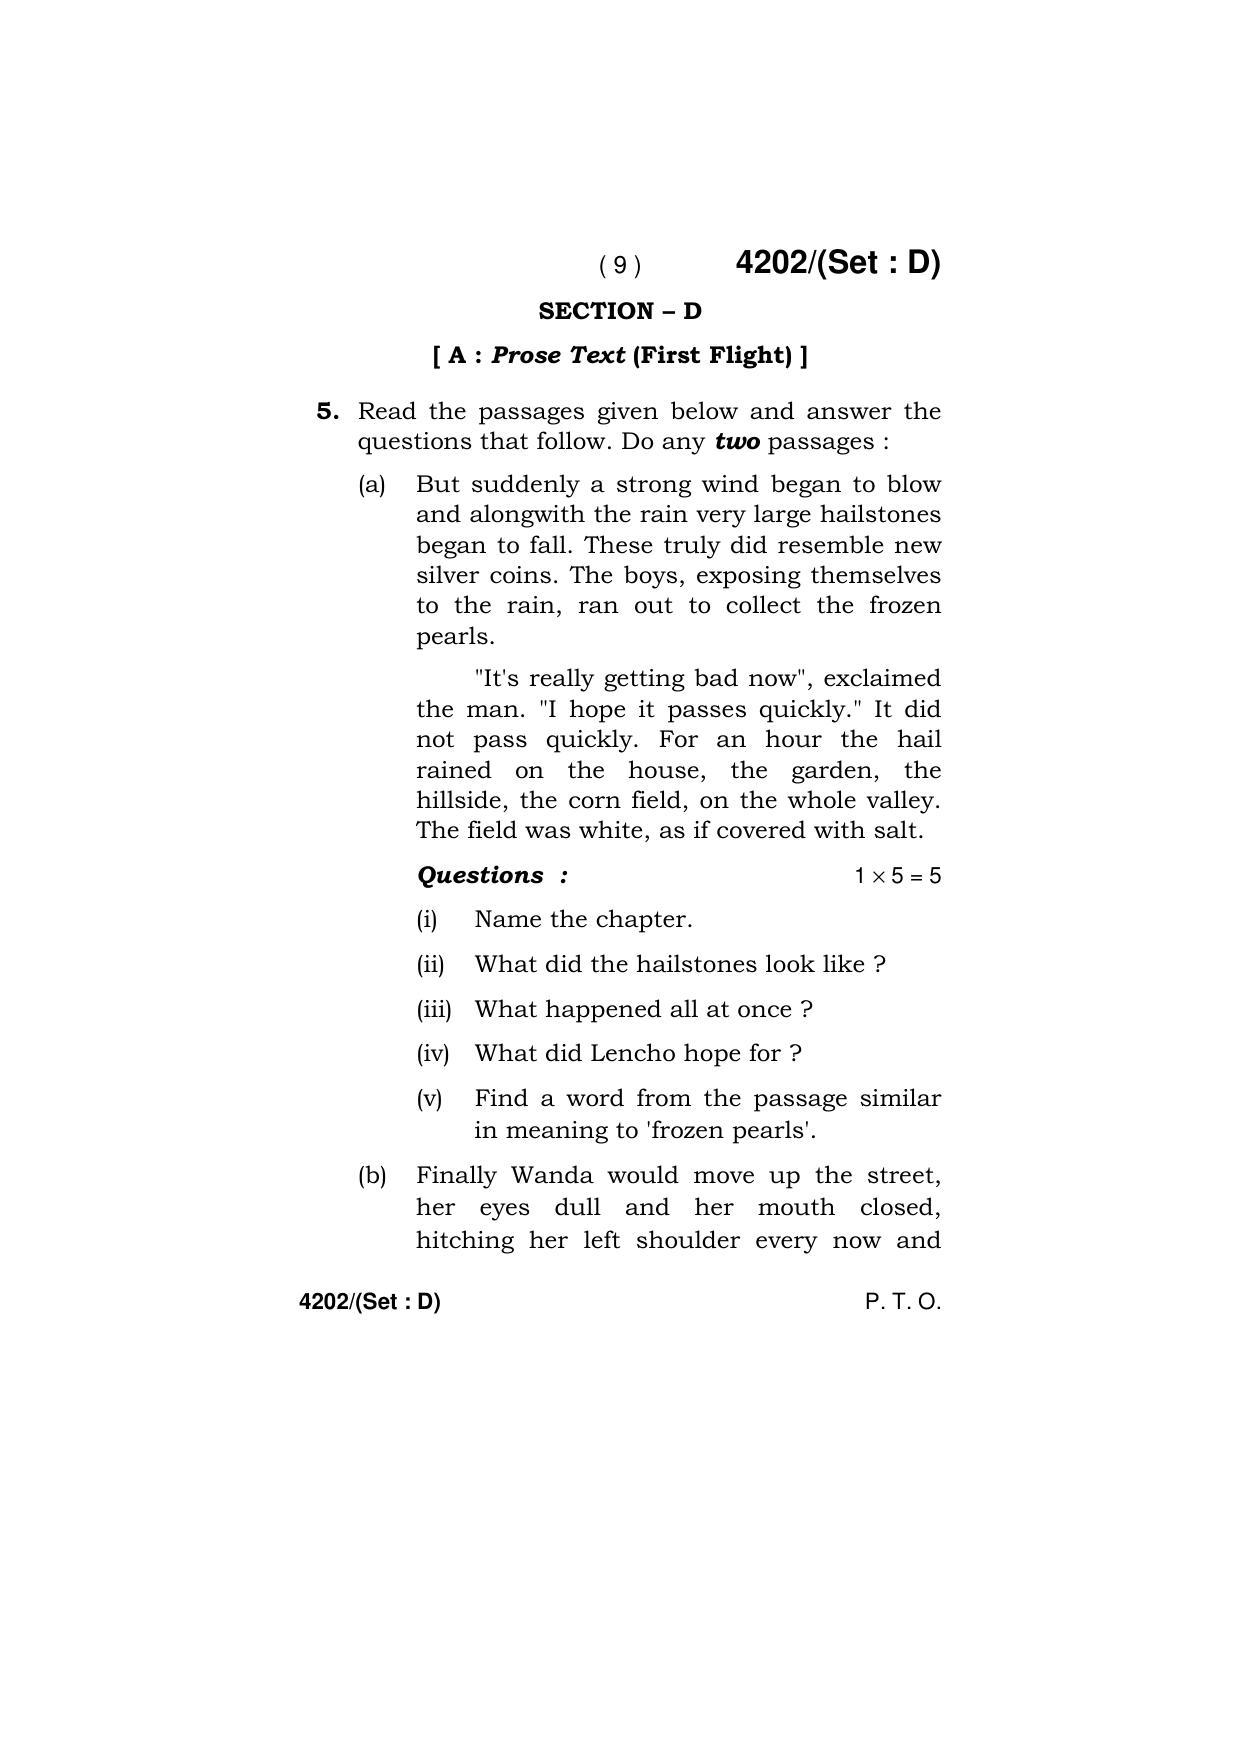 Haryana Board HBSE Class 10 English (All Set) 2019 Question Paper - Page 57